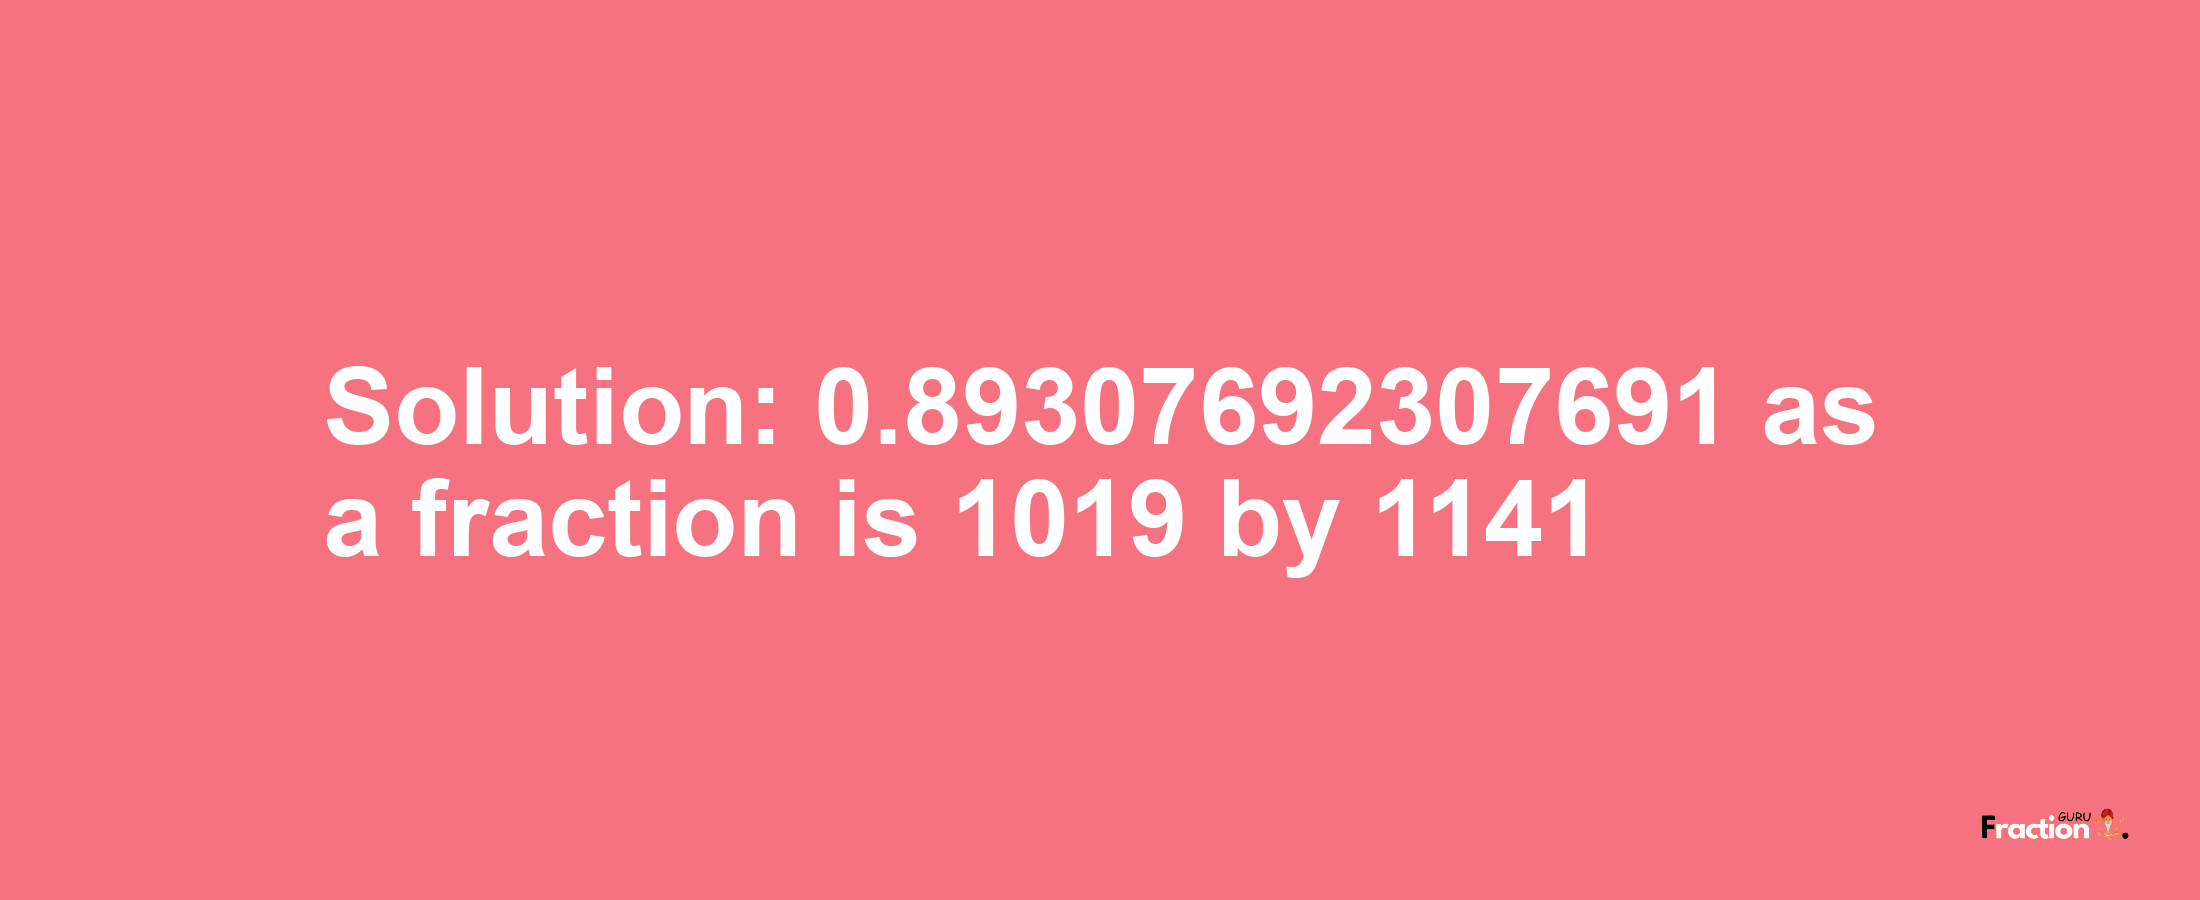 Solution:0.89307692307691 as a fraction is 1019/1141